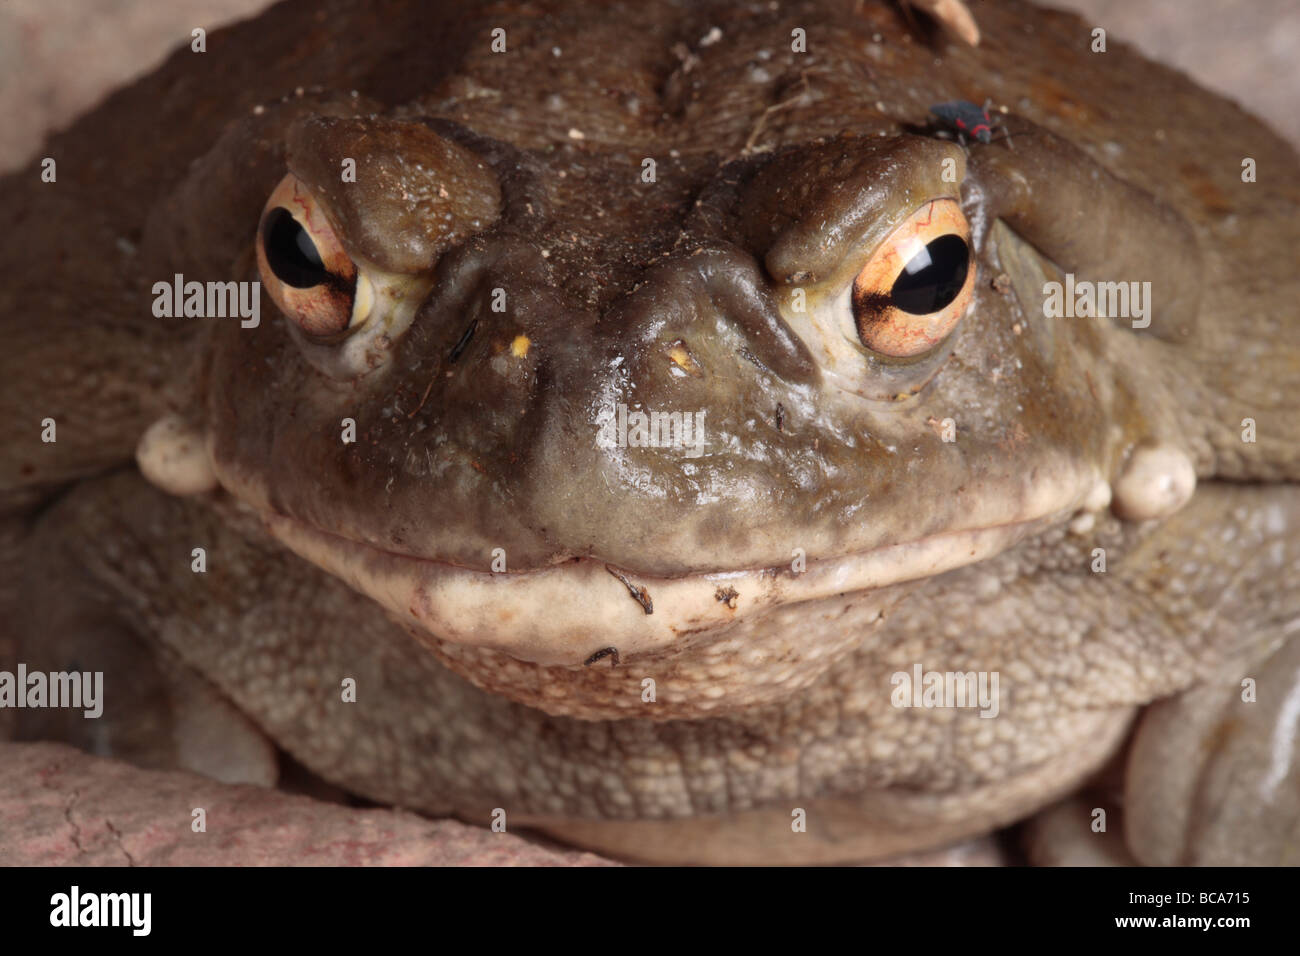 A sonoran desert toad Pauses for a photo Stock Photo